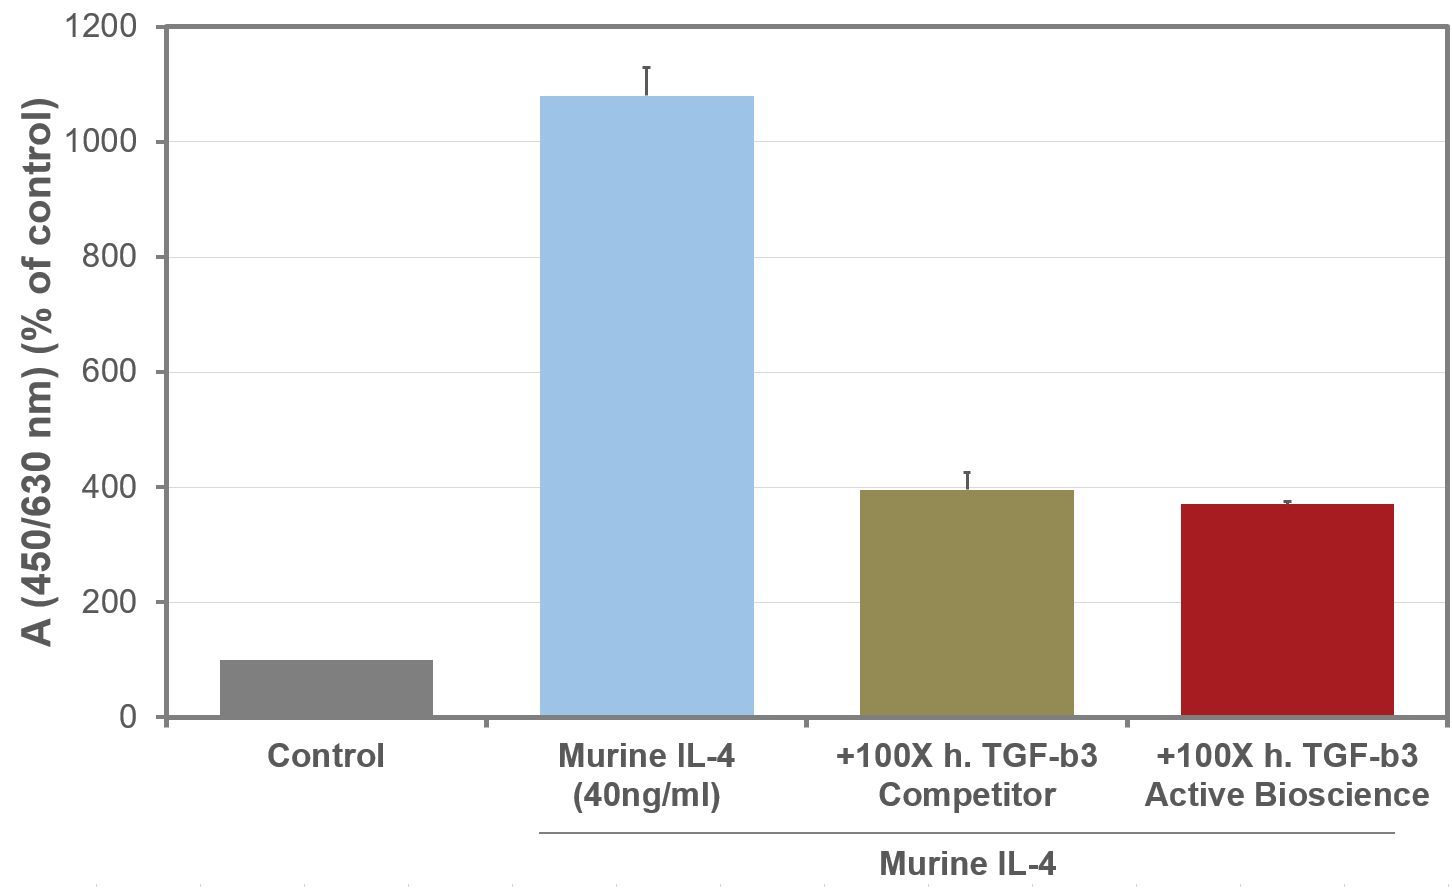 <strong>Fig. 1</strong>: Inhibition of mouse IL4-induced proliferation in HT2 cells by Human TGF-beta3. HT2 cells were stimulated with 40ng/ml mouse IL4 and inhibited with 4µg/ml Human TGF-beta3. Values are the means (±SD) of triplicate determinations and expressed as percentage of control.